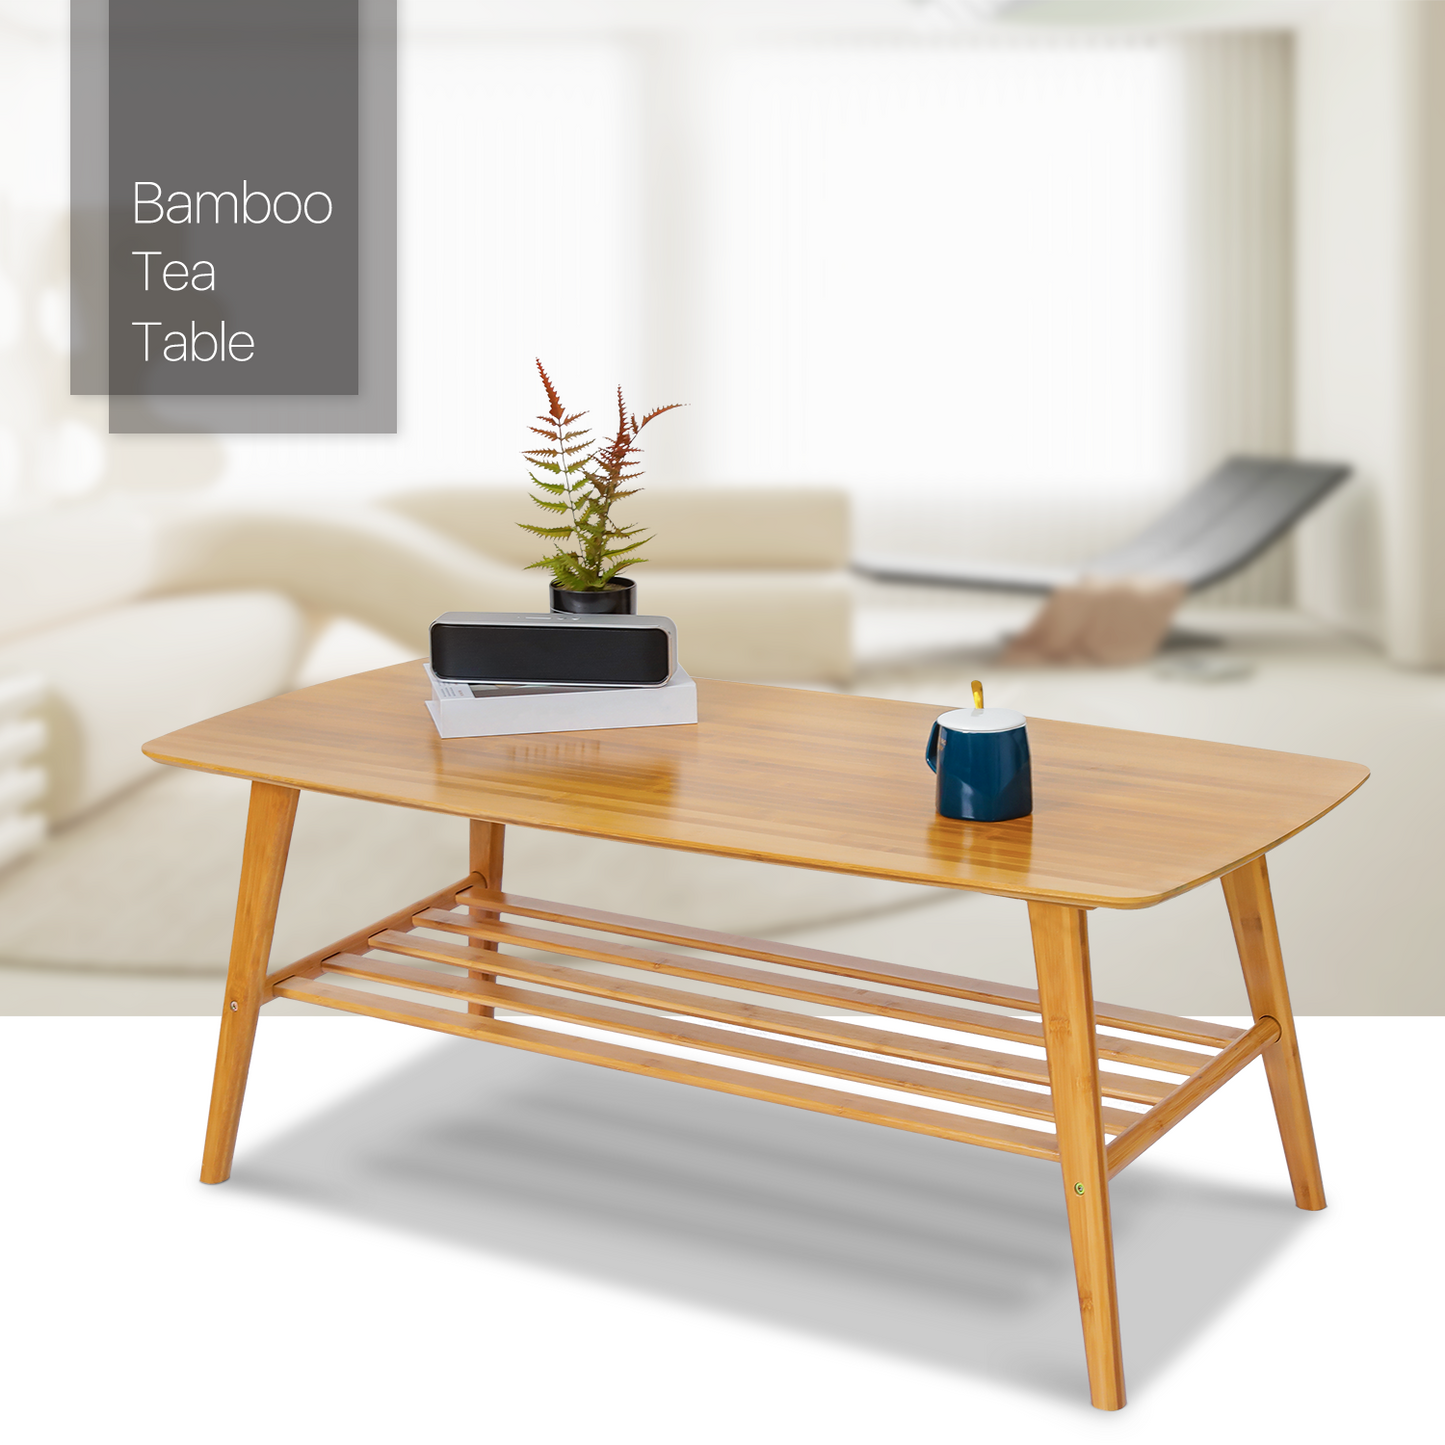 Rectangular Dual Tier Coffee Table - 2 Tiers 39.3", Natural